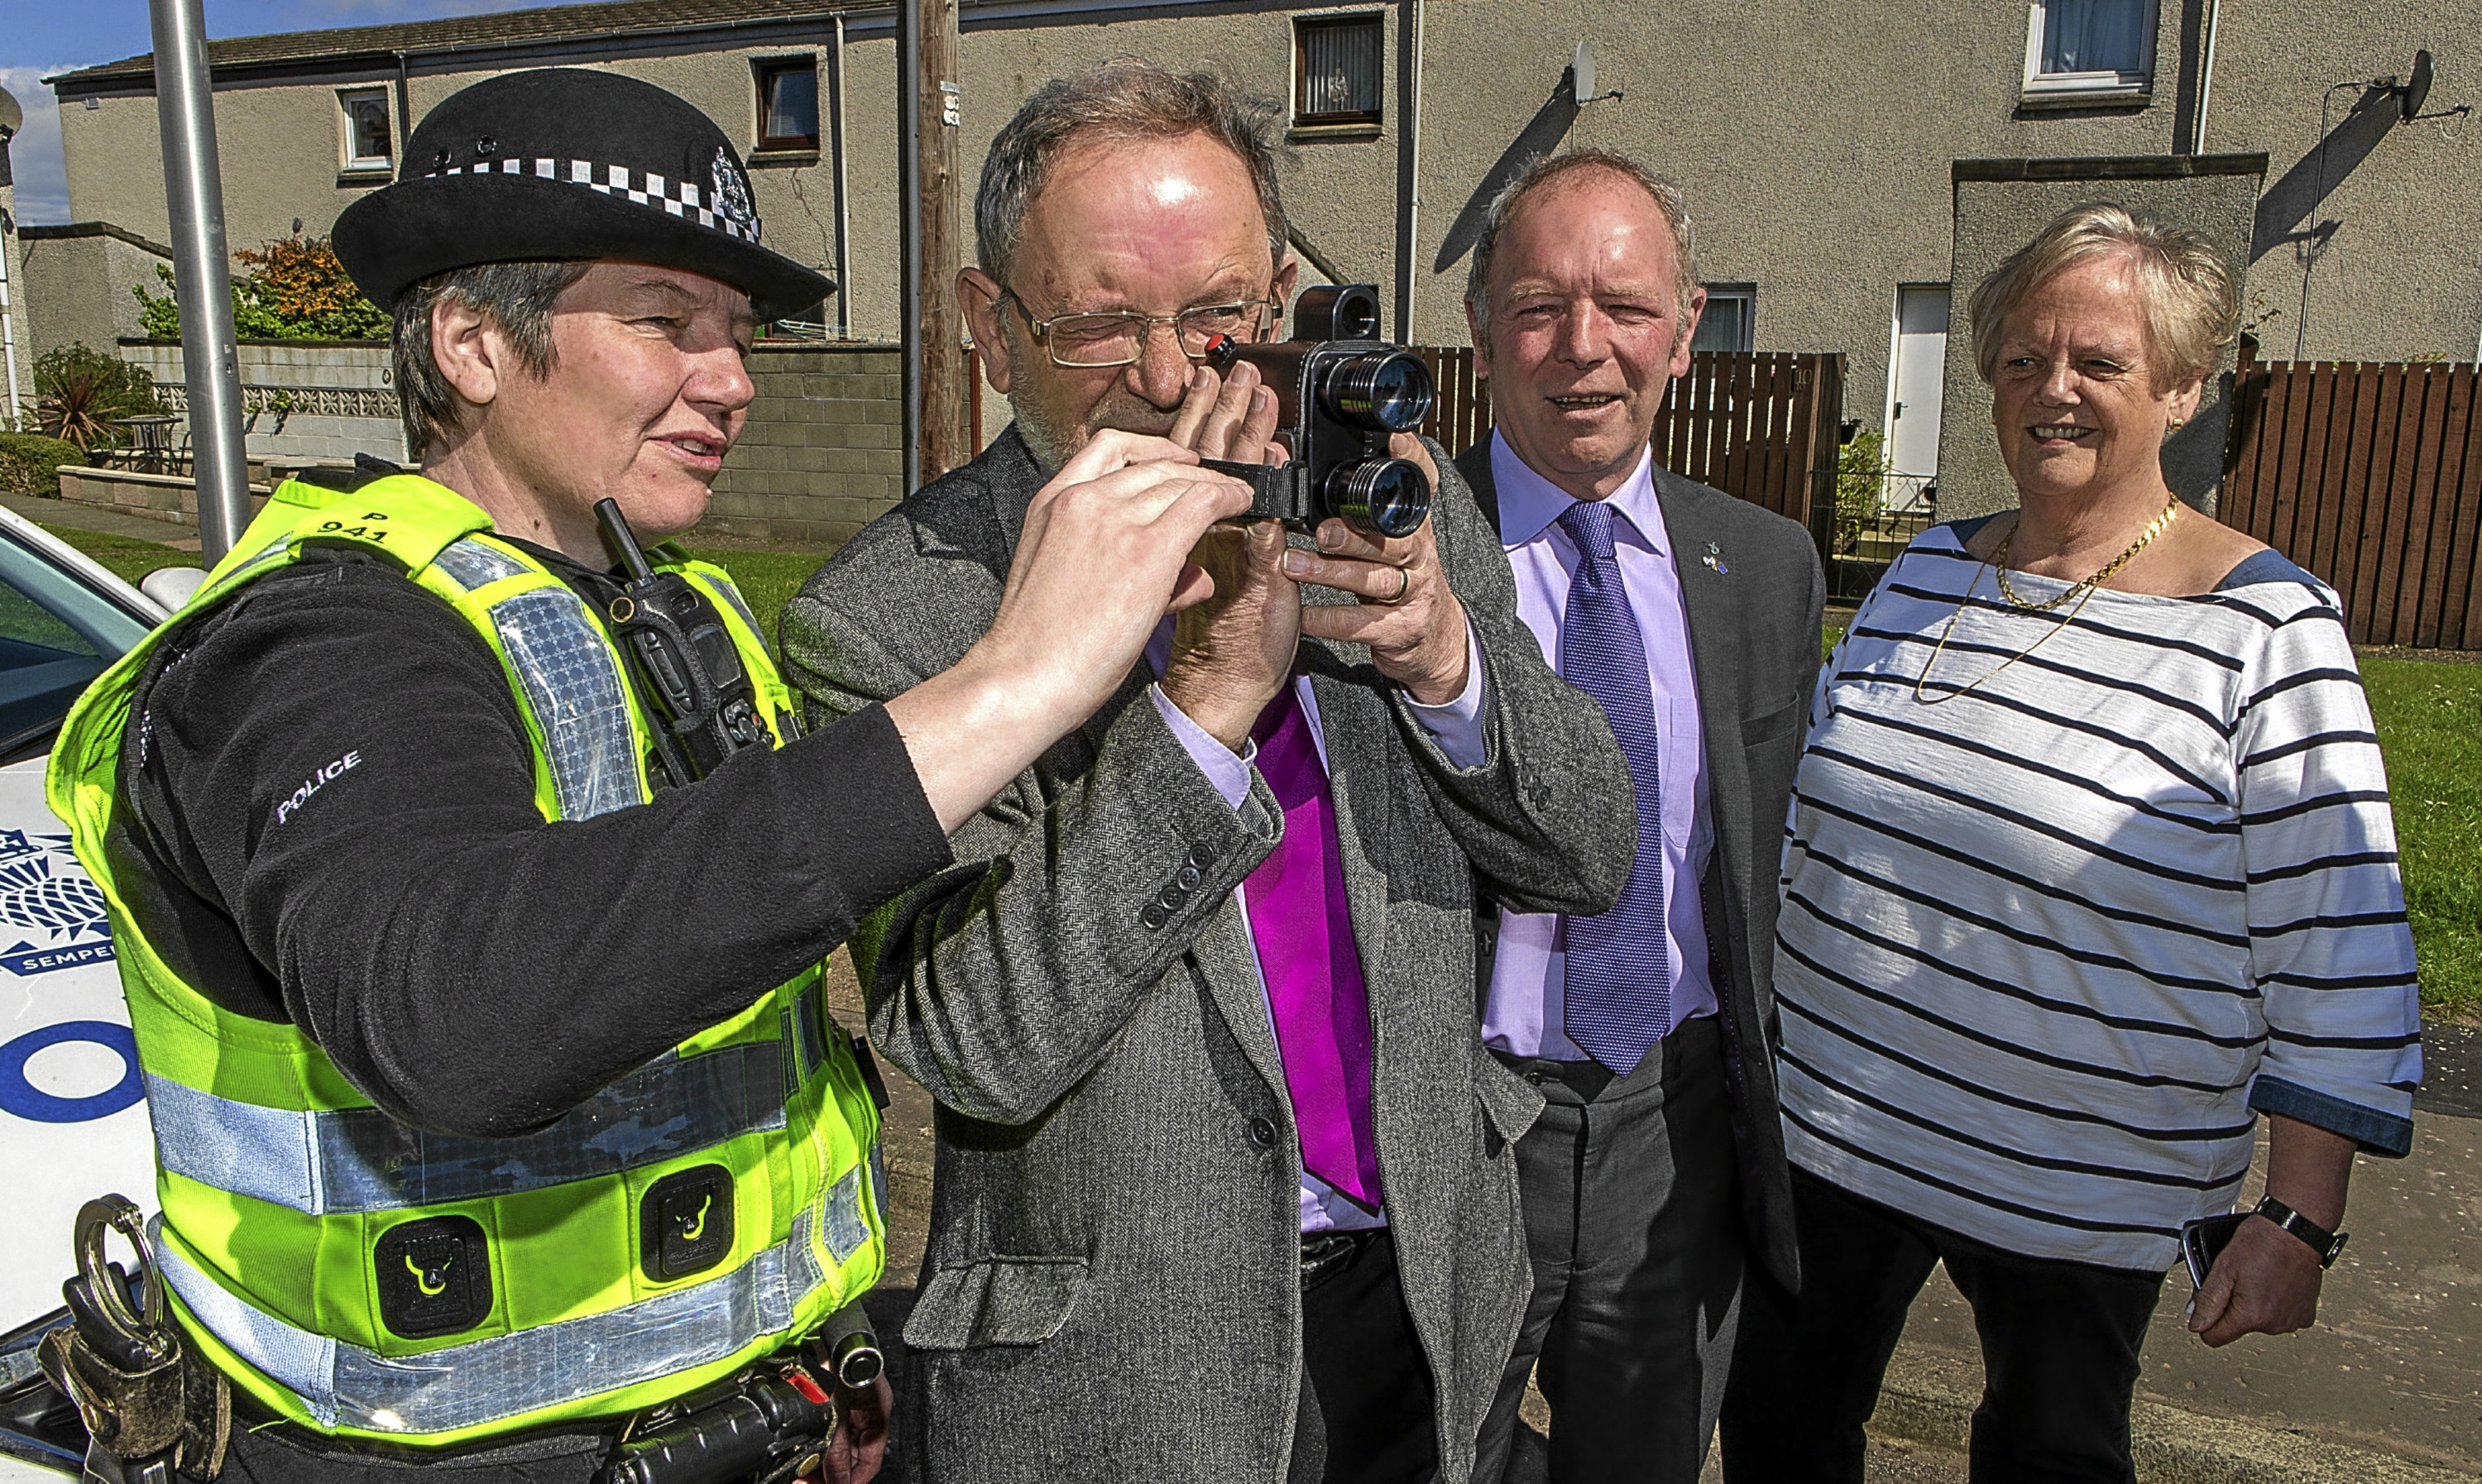 Local Councillors have purchased and donated a new Handheld Laser Speed Meter for Police Scotland to use. The UNIPAR SL700 meter will be in force to keep speeding vehicles in touch locally. PC Susie Martin demonstrates the new camera to Cllr Tim Brett, overlooked by Cllrs Bill Connor and Maggie Taylor